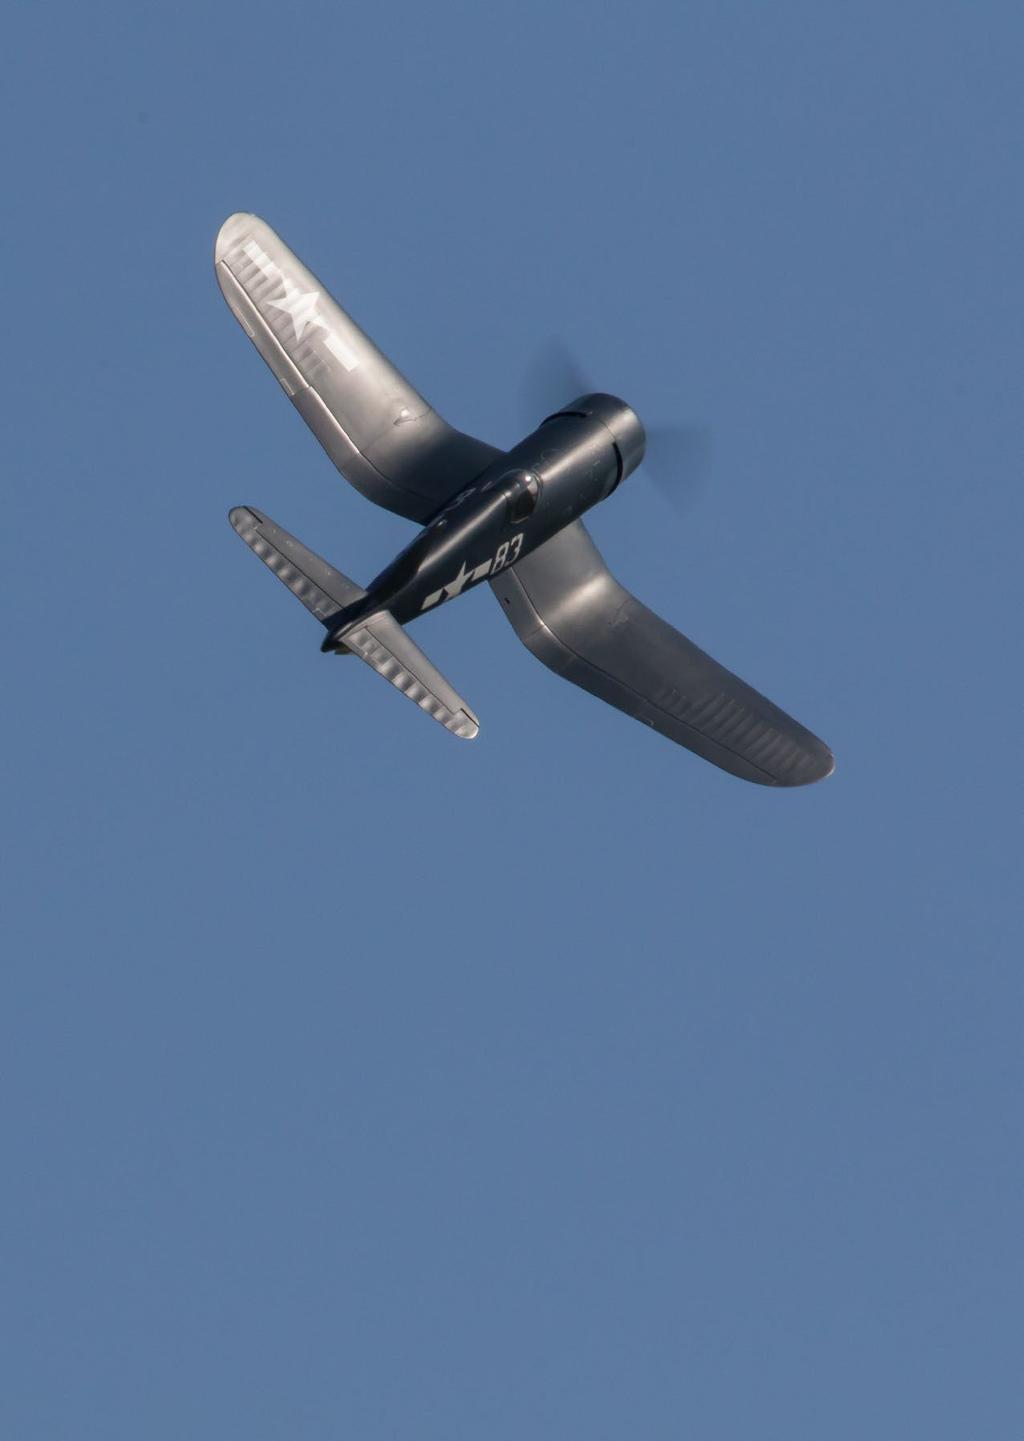 PGRC S BIG/WARBIRD EVENT - by Scott McClurg Bill Fairweather s been a member of the